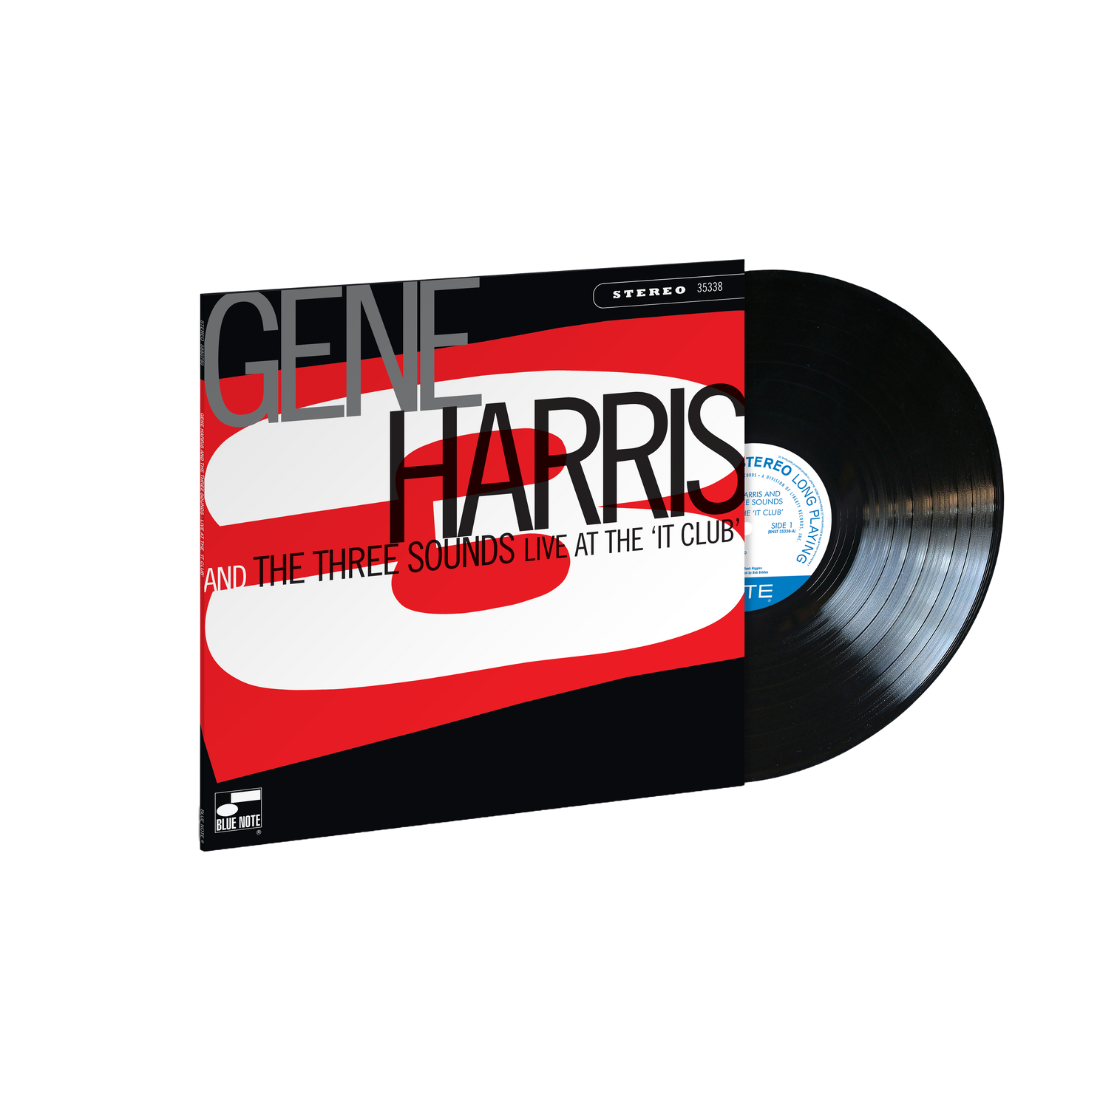 Gene Harris and the Three Sounds - Live at the ‘It Club’: Vinyl LP